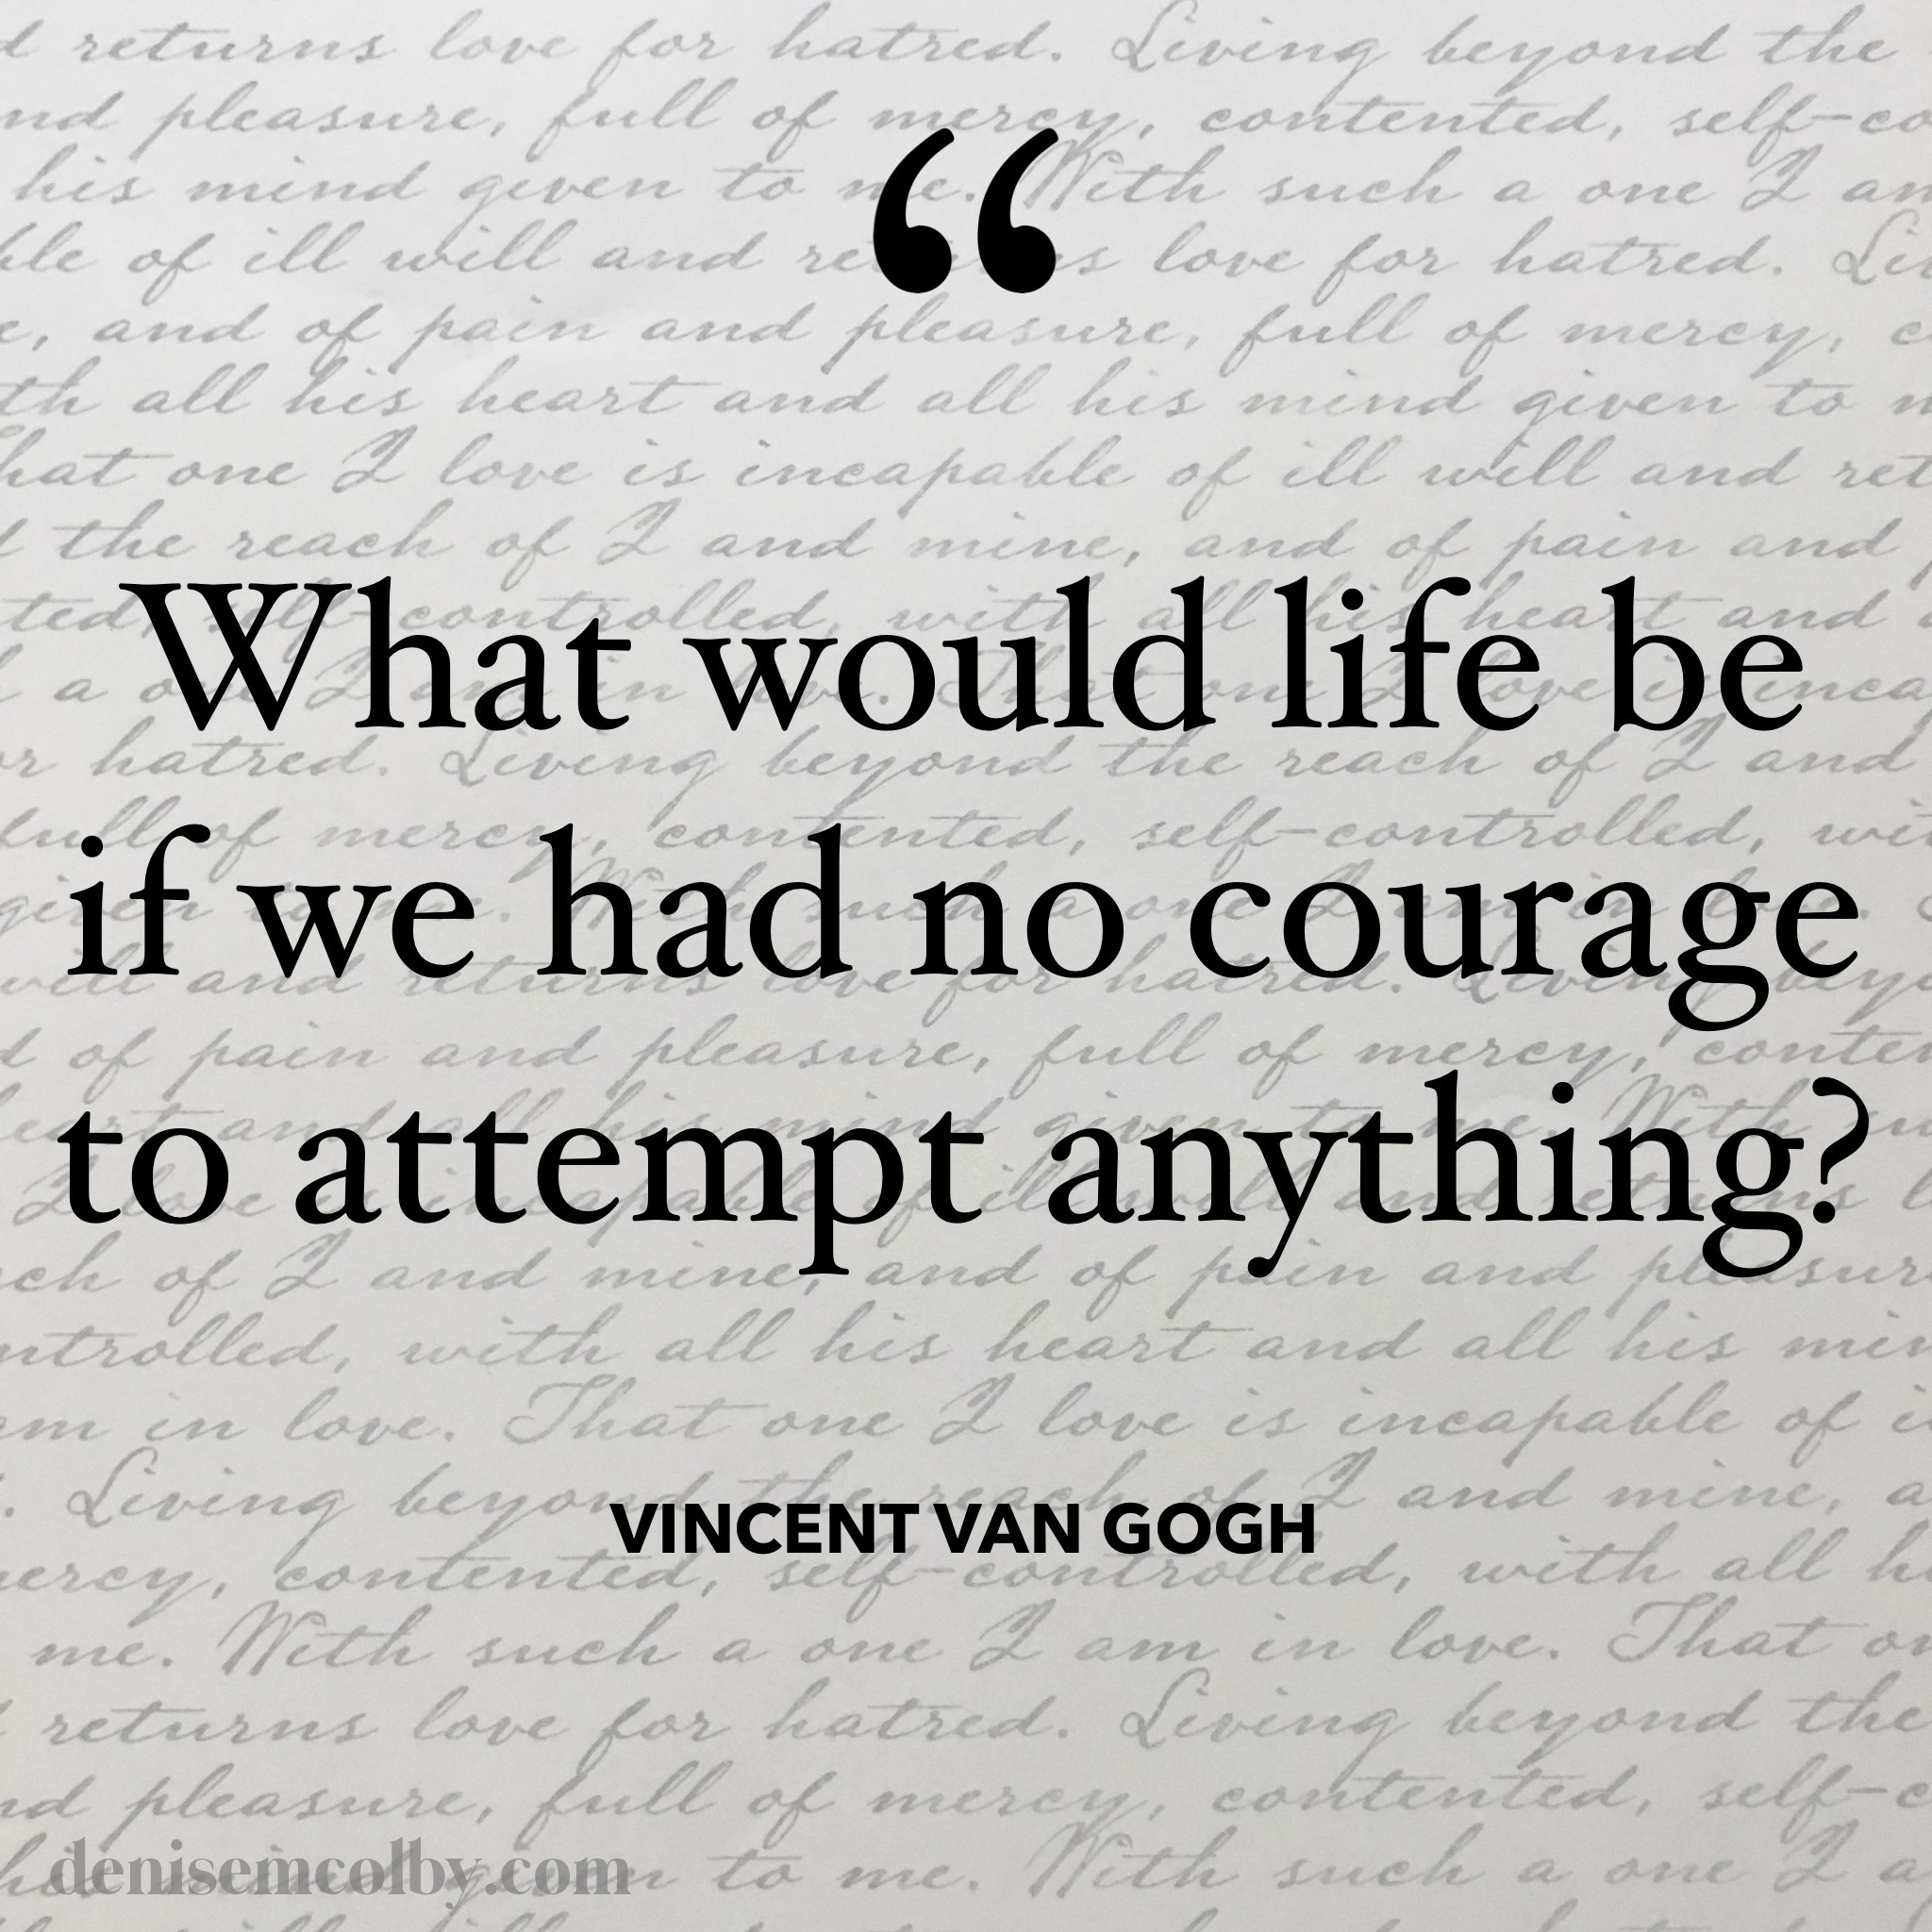 Vincent Van Gogh Quote about courage with cursive writing in the background